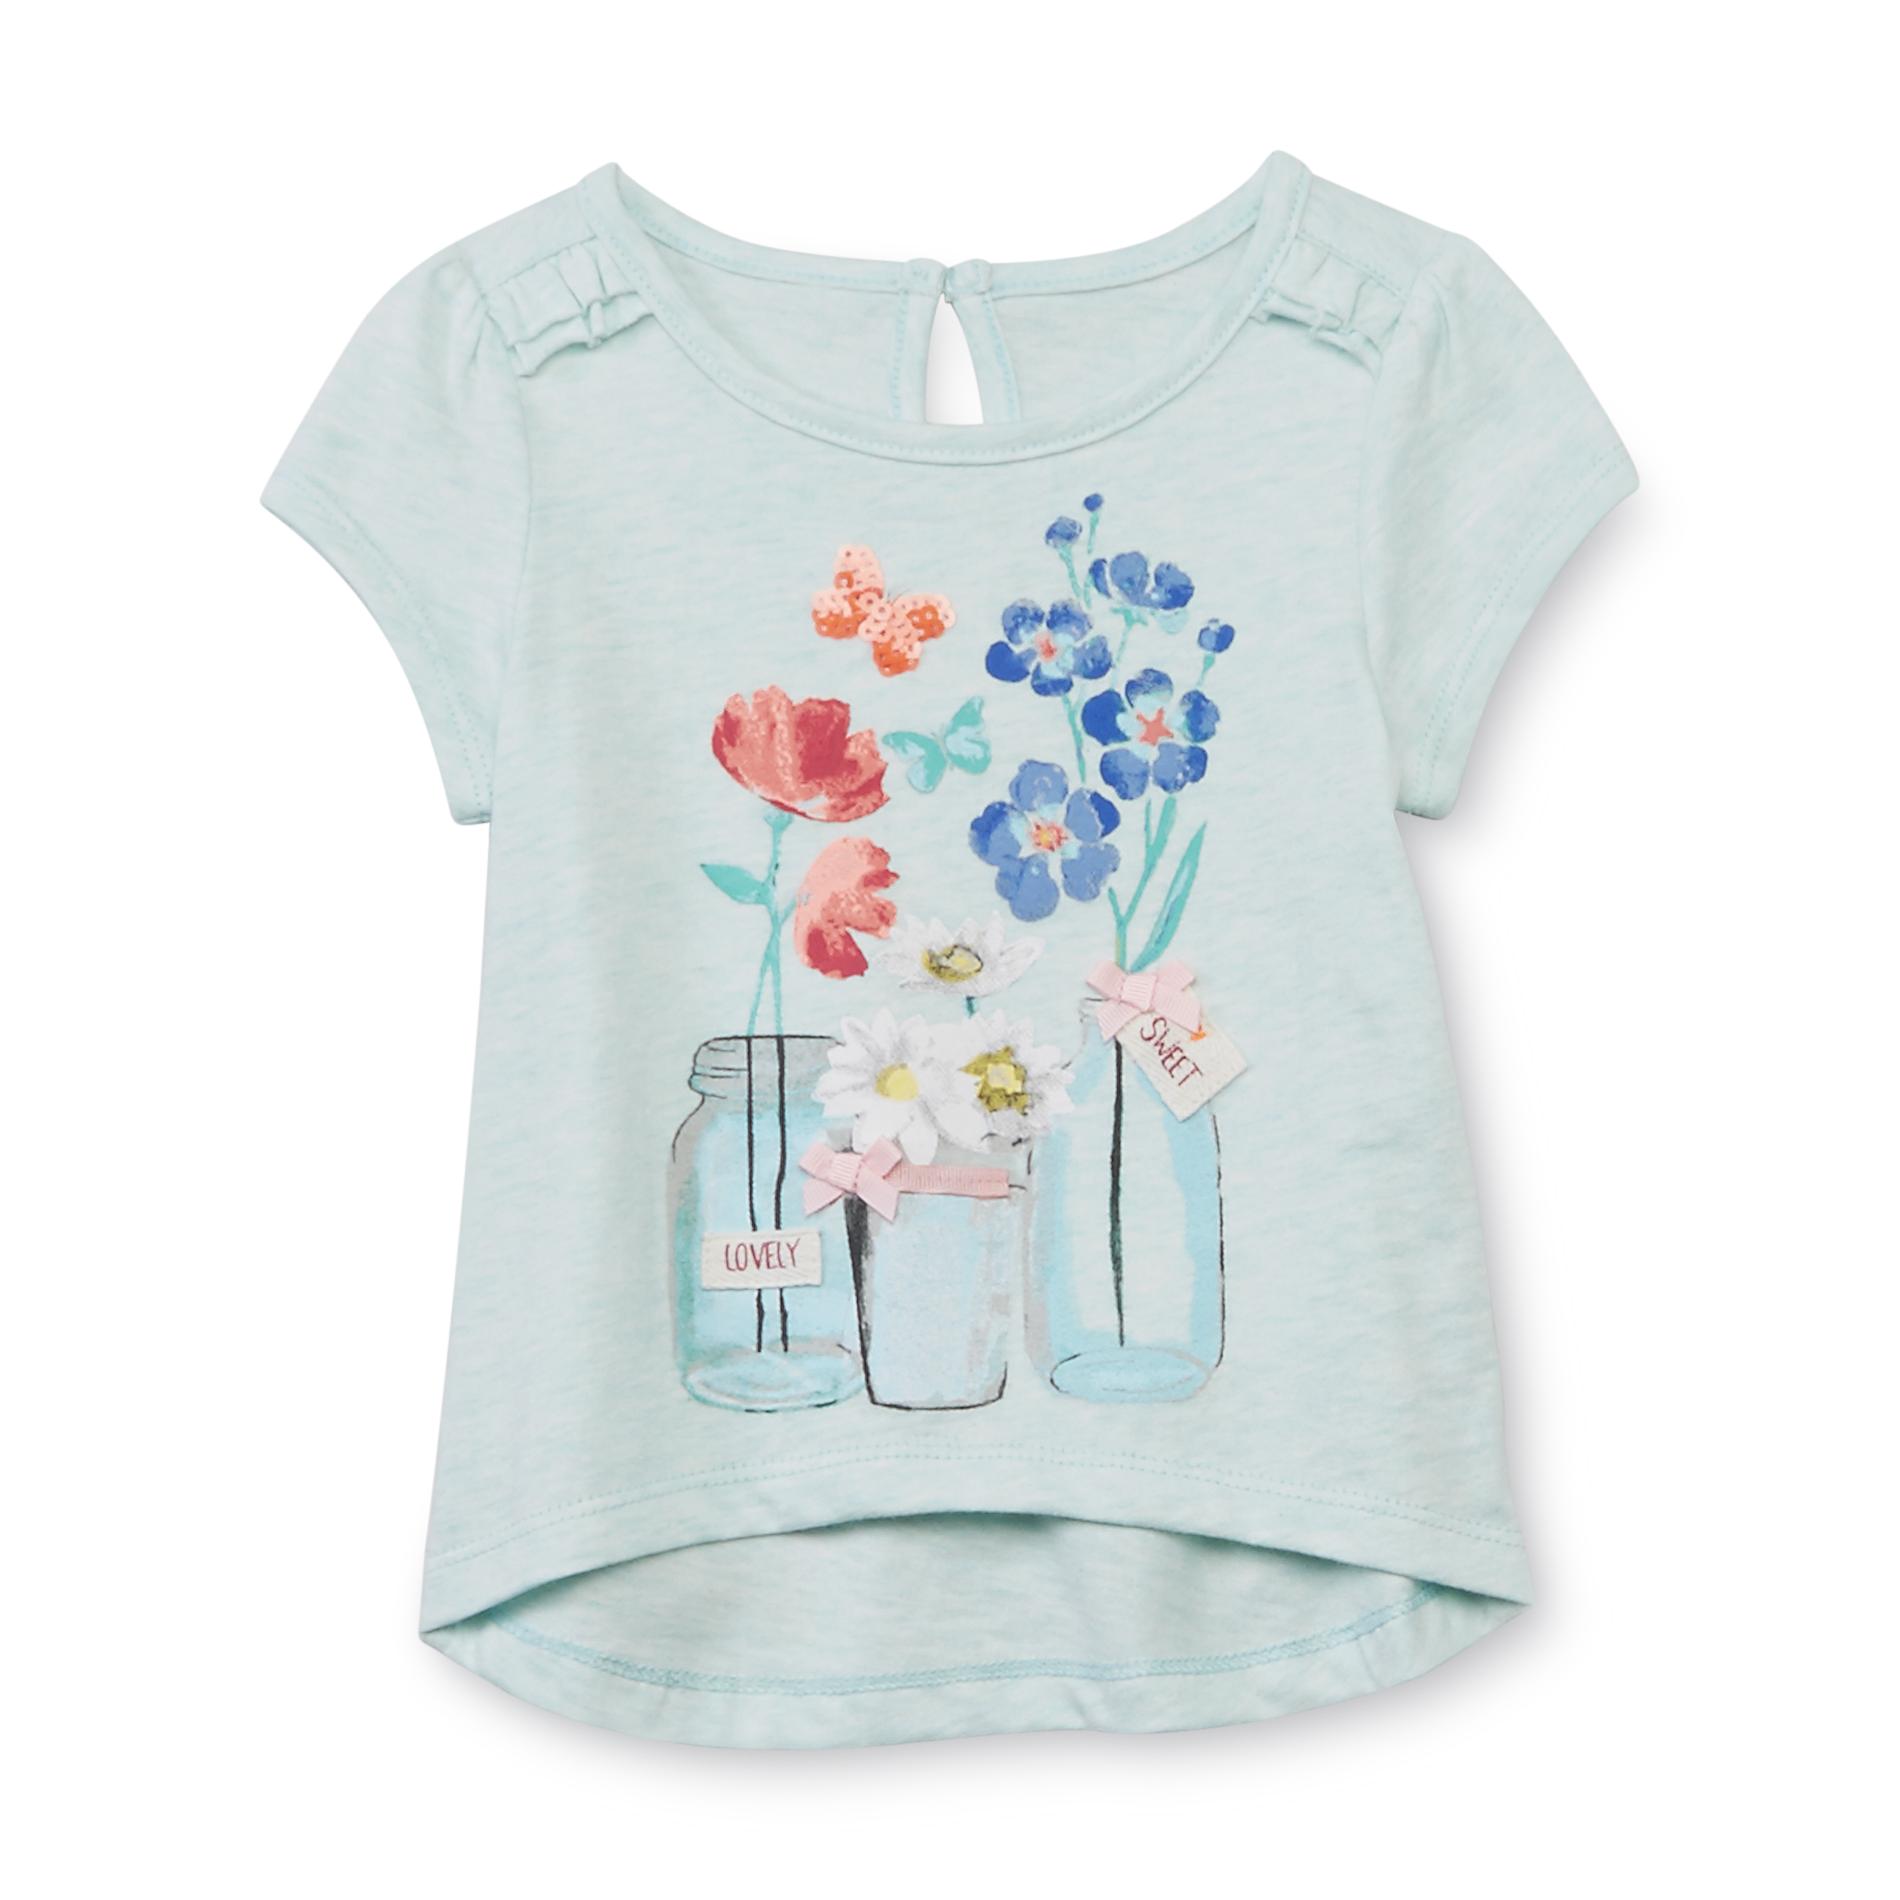 Toughskins Infant & Toddler Girl's High-Low Top - Flowers